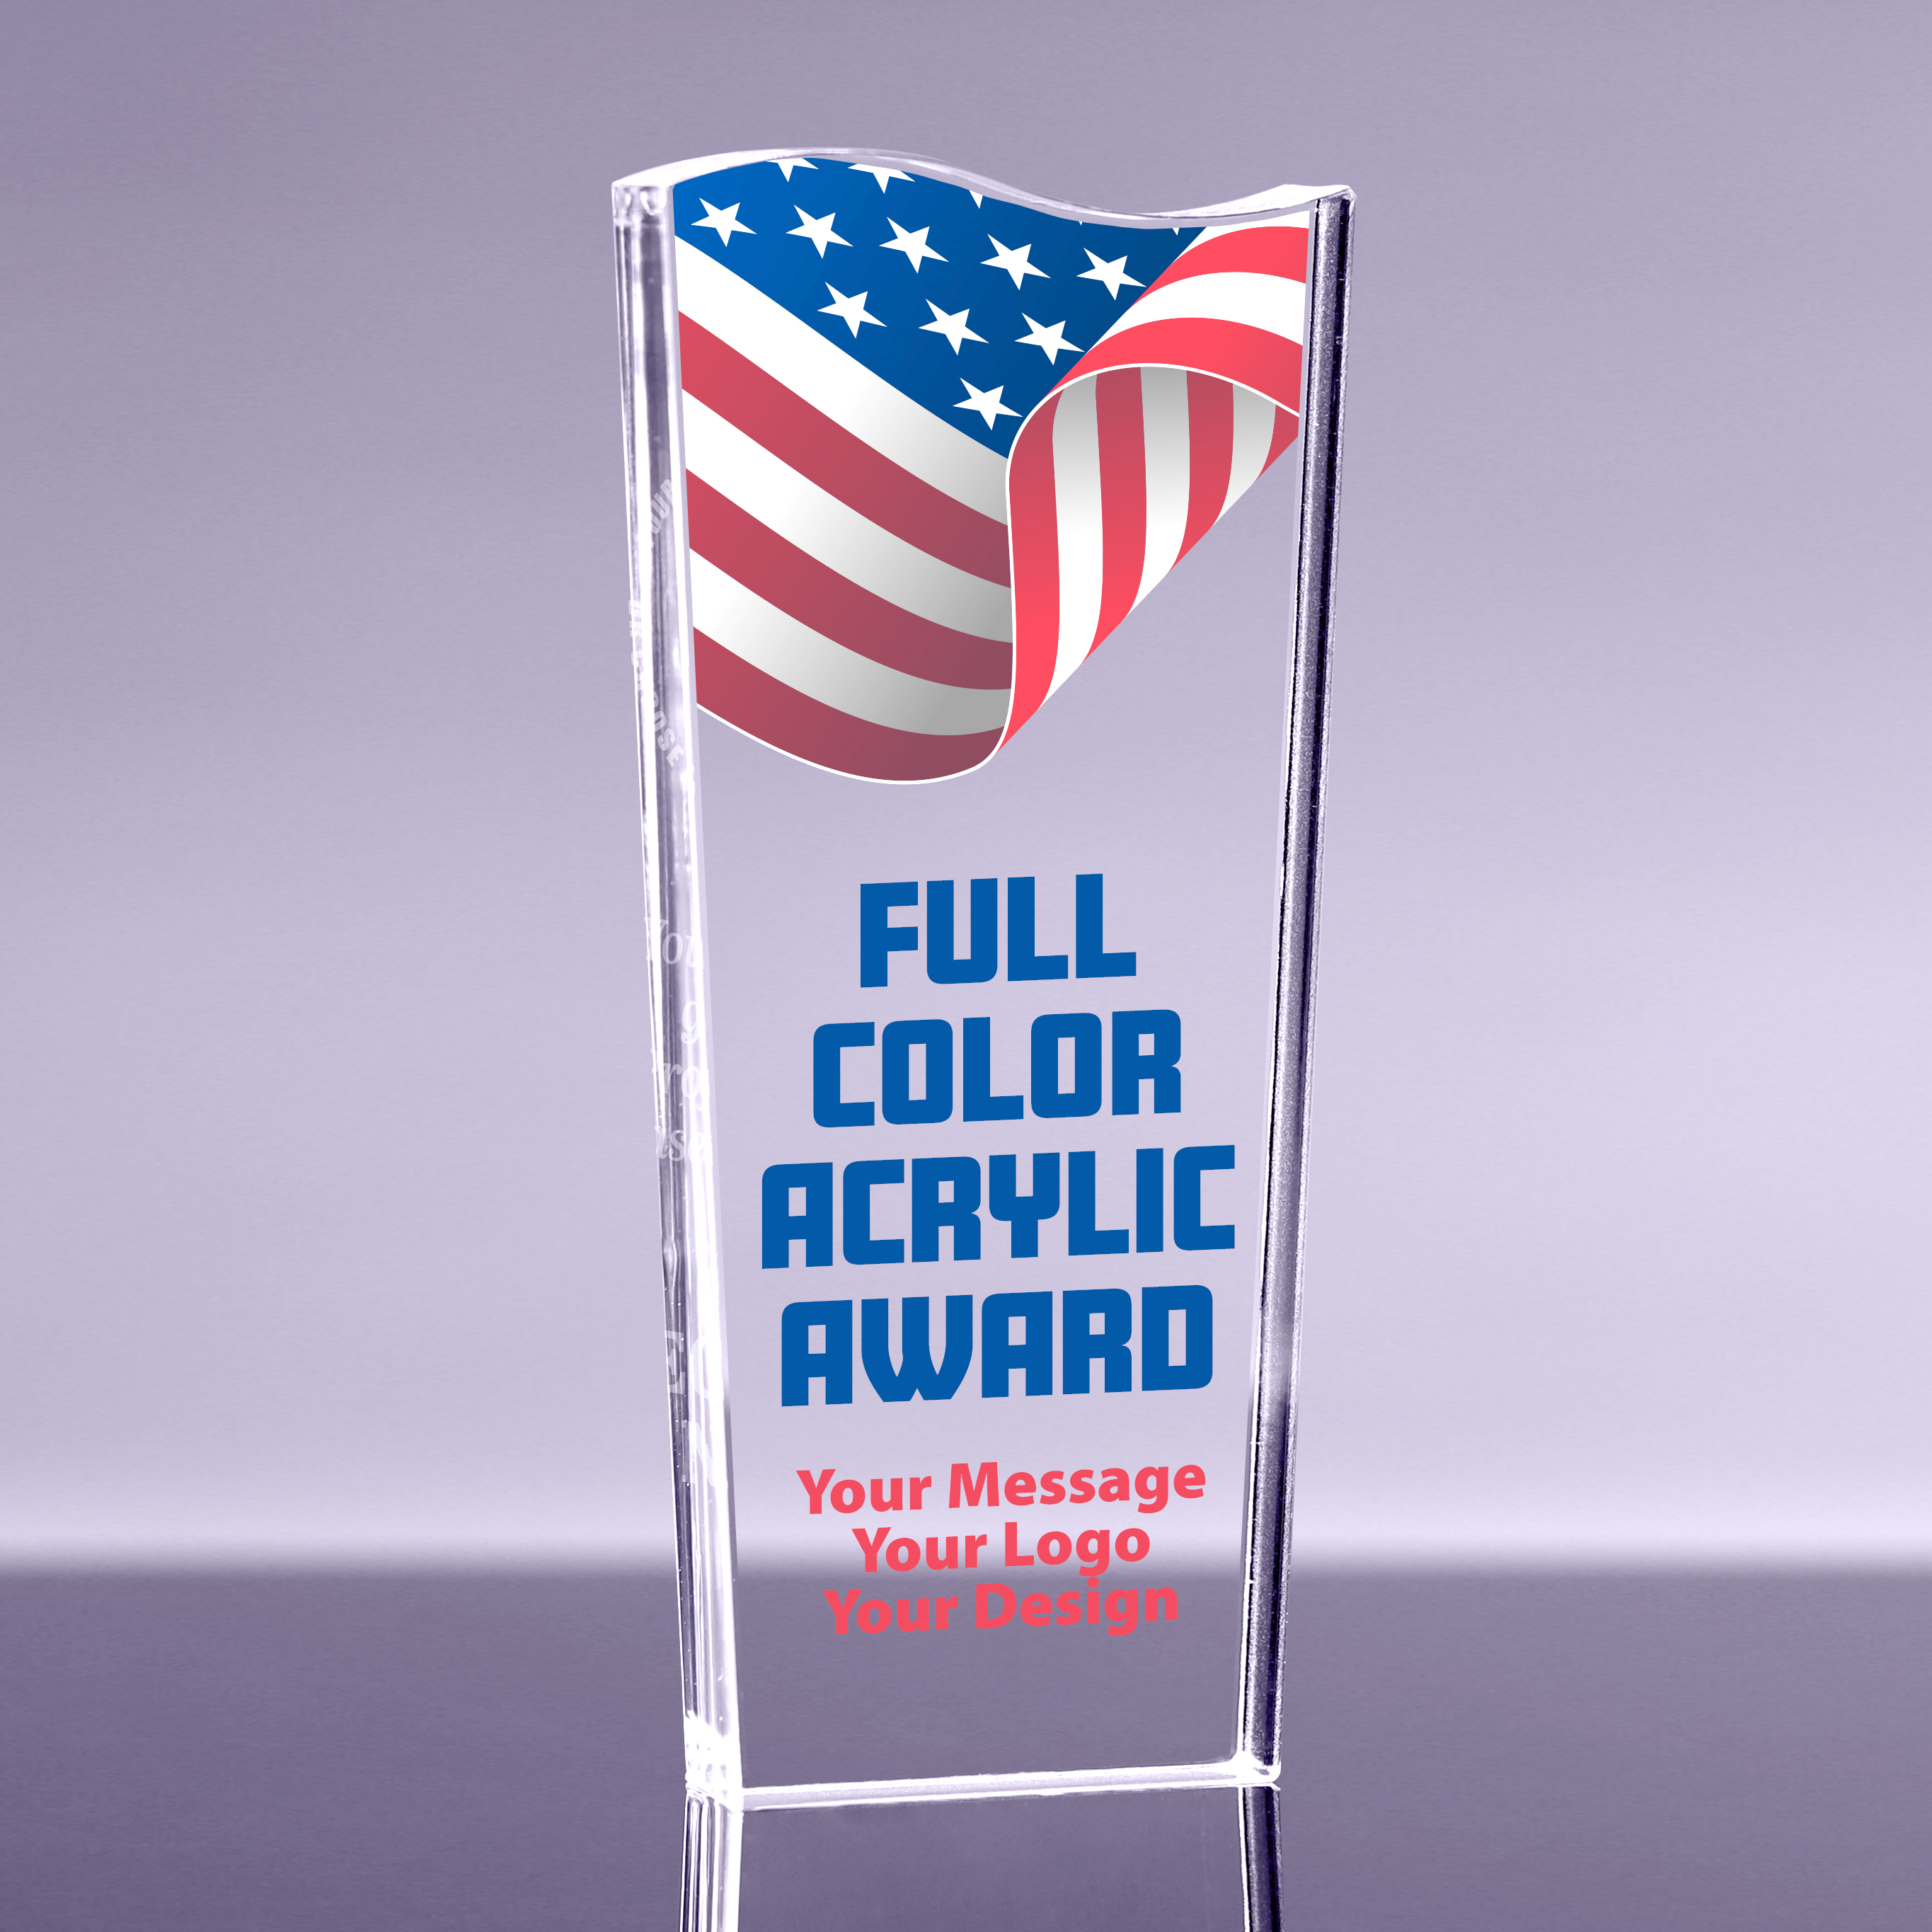 1 inch Thick Acrylic Tidal Wave Award - 10 inch Color